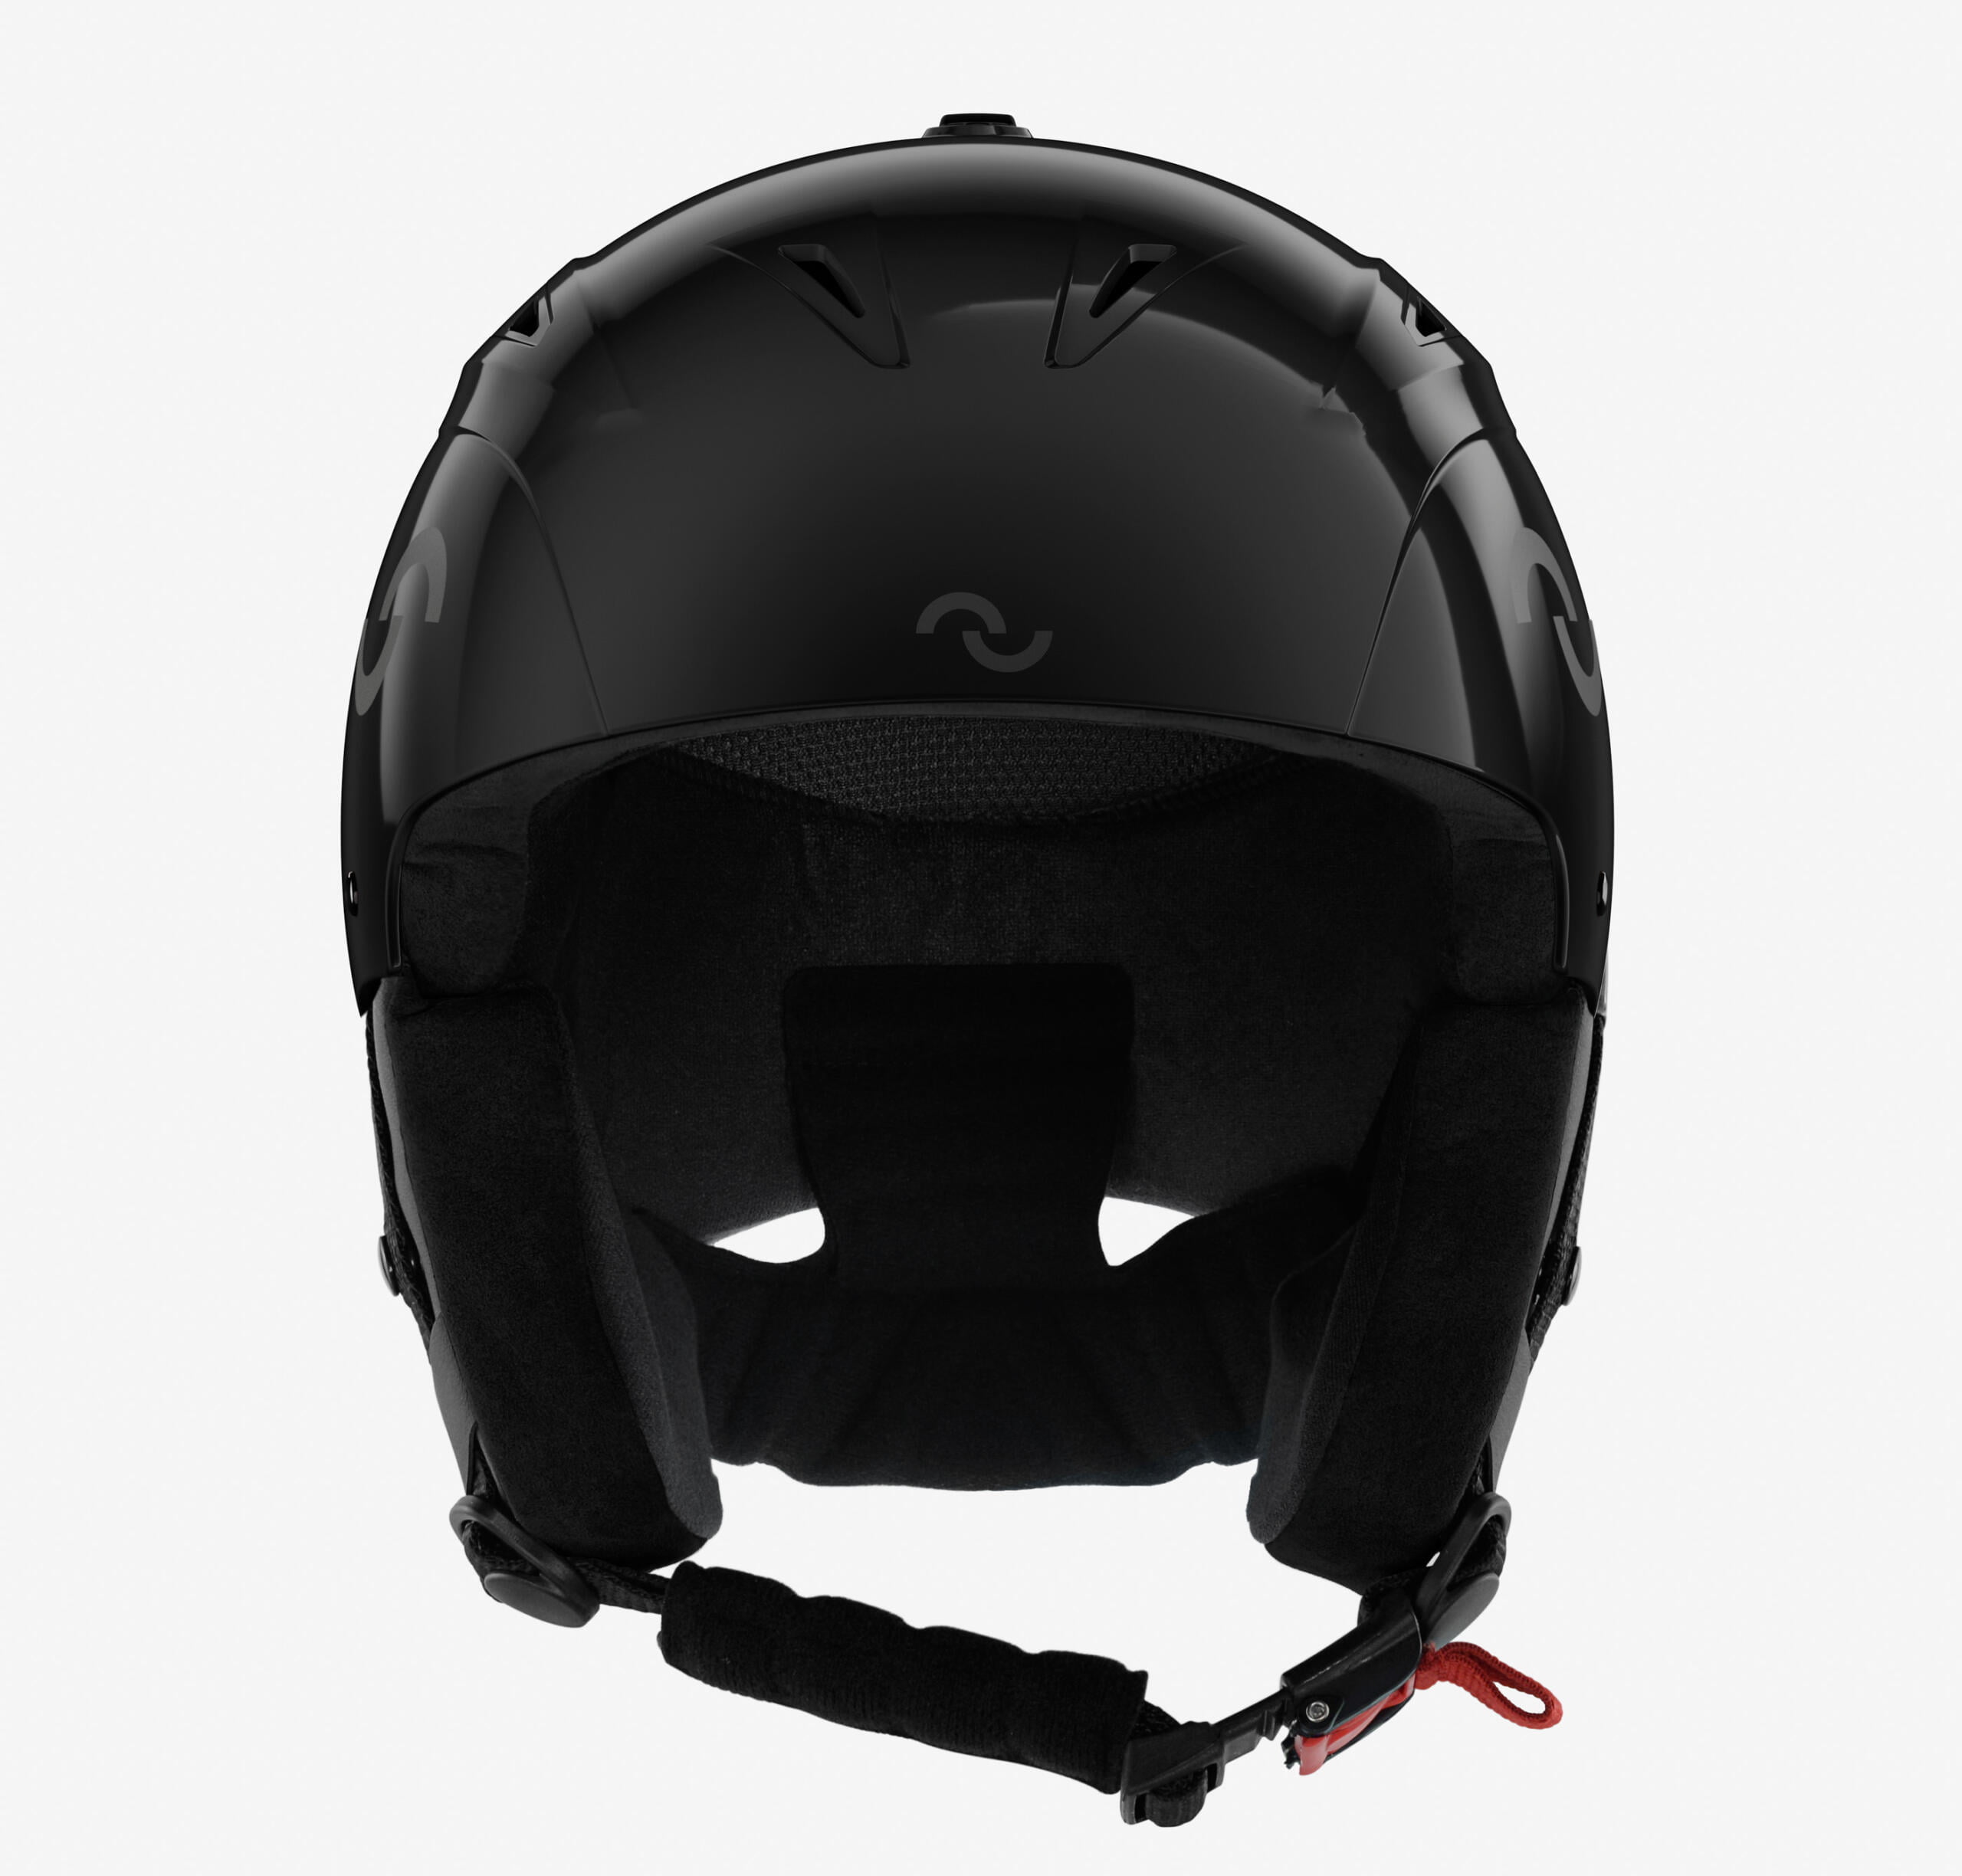 Legend UltraGloss ski helmet in black with a high-gloss finish, adaptive foam, and certified safety, epitomizing modern elegance and protection.